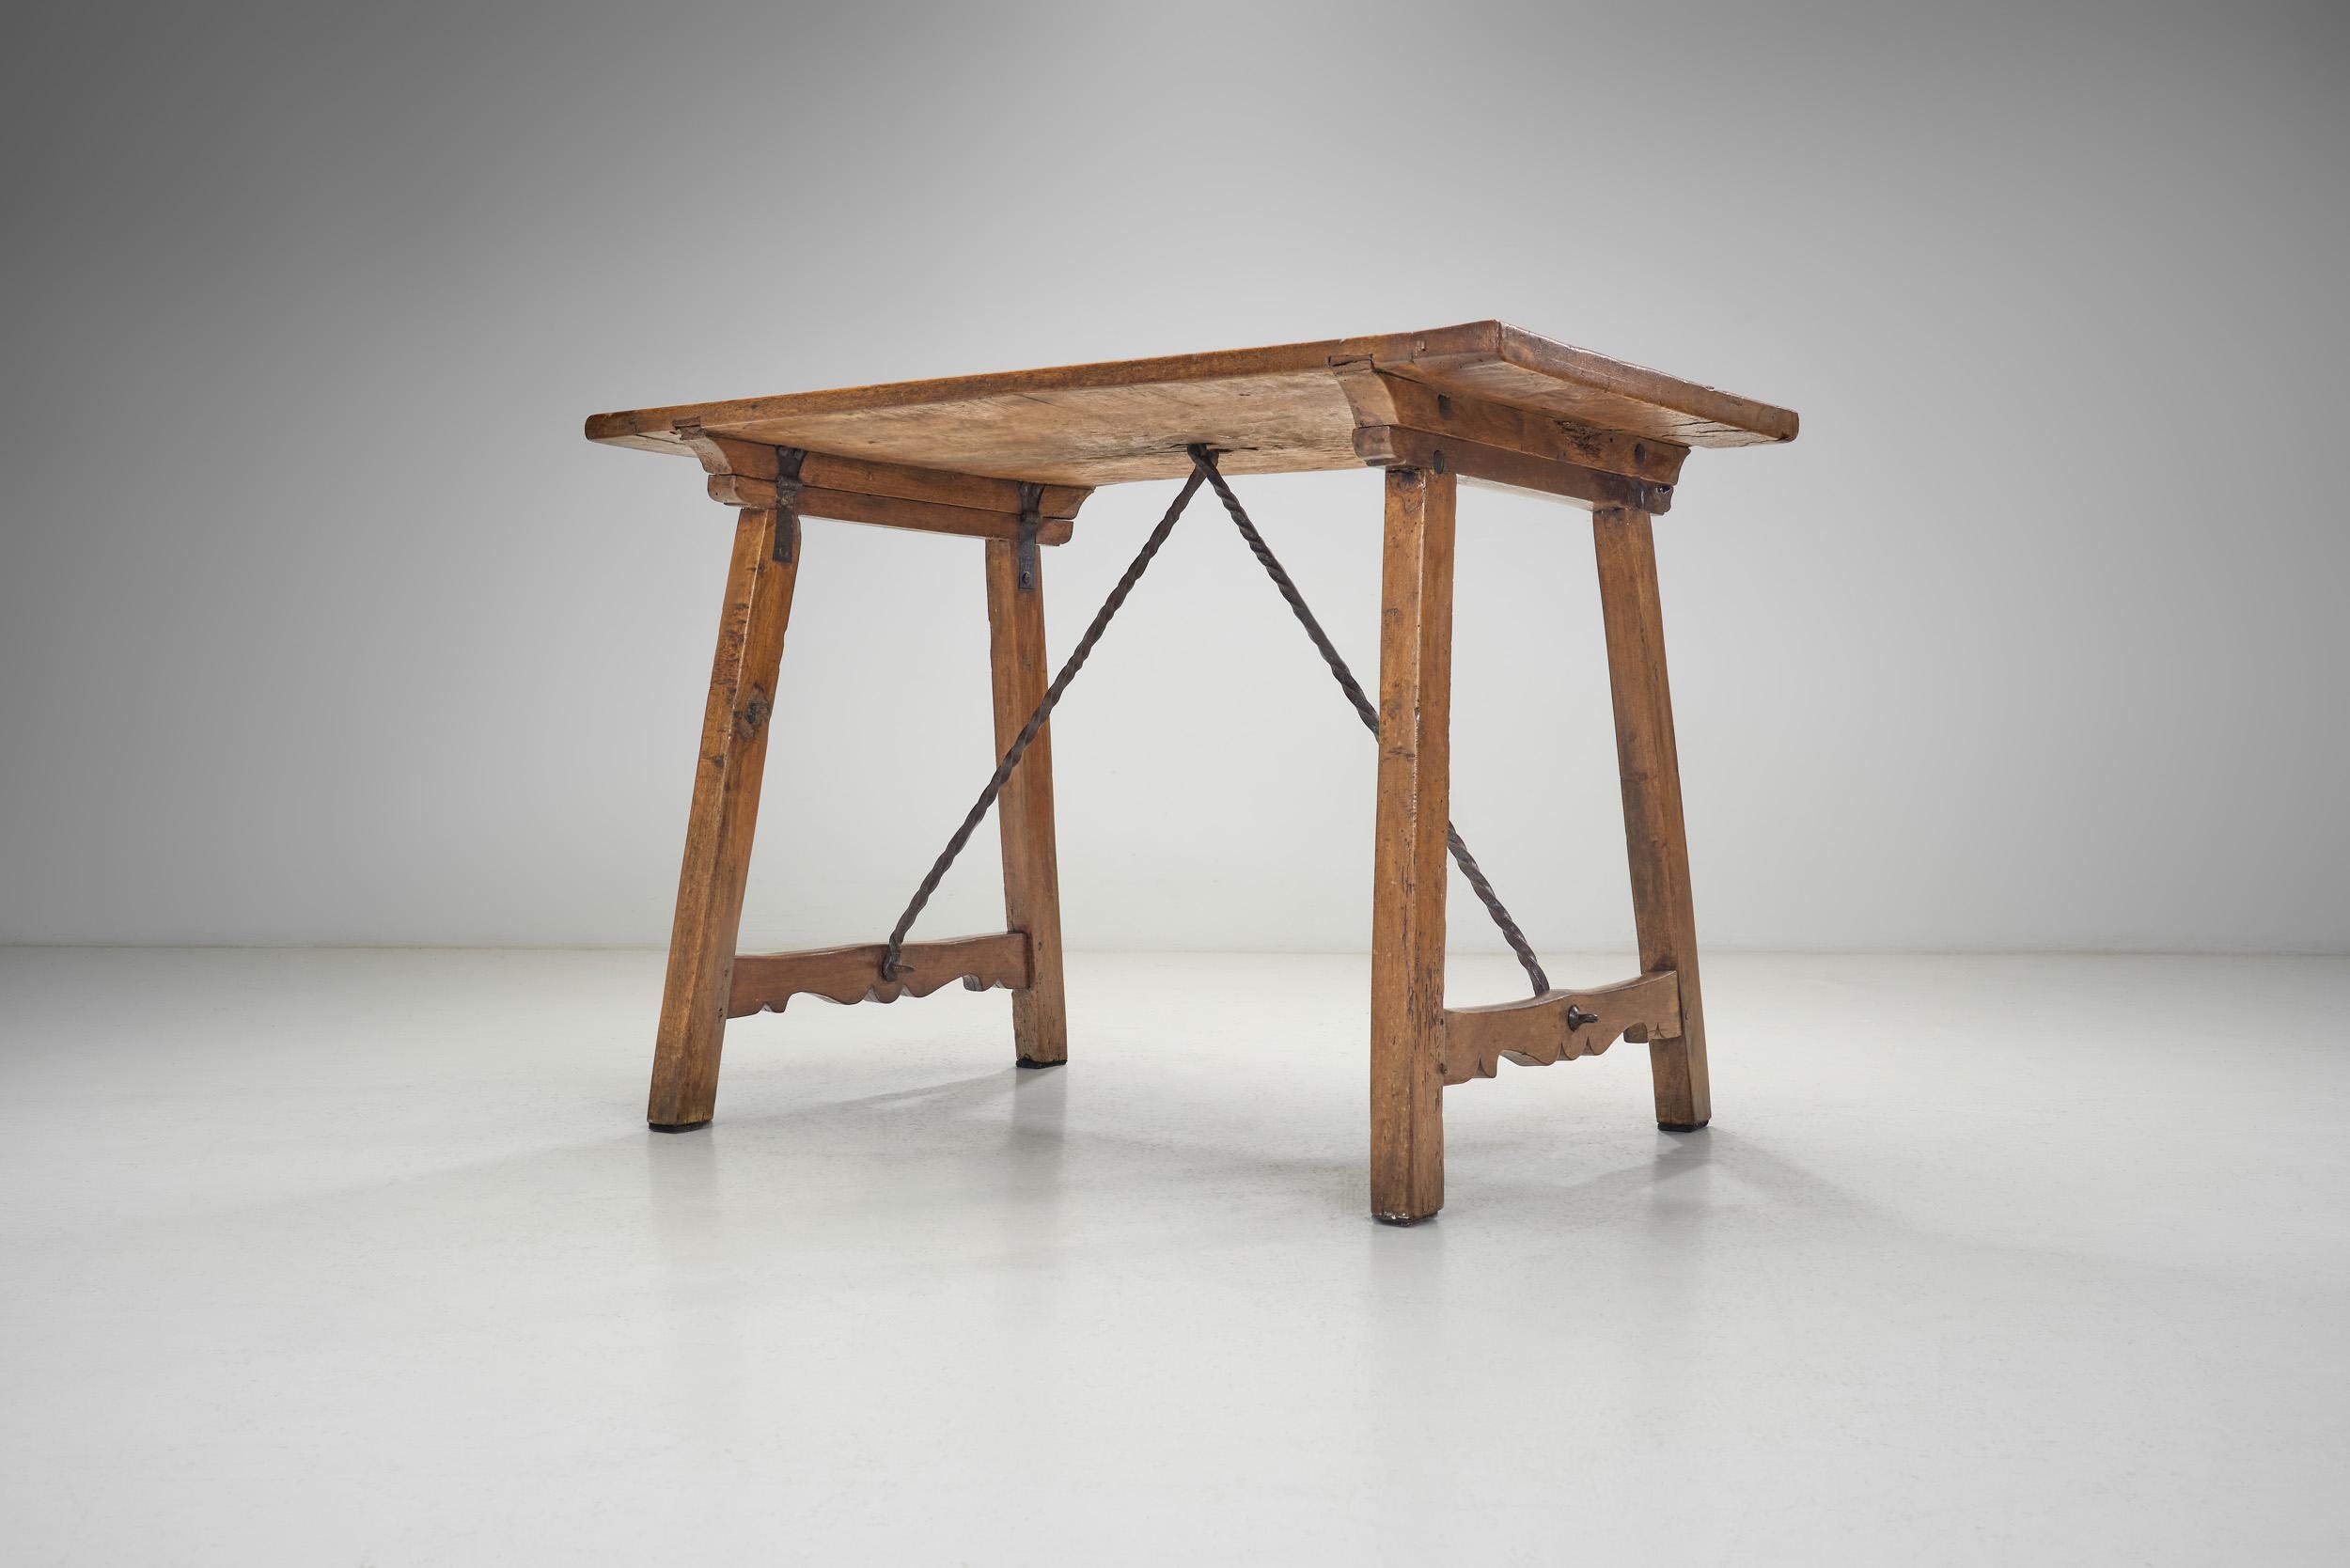 Spanish Walnut and Wrought Iron Table, Spain late 18th century For Sale 4